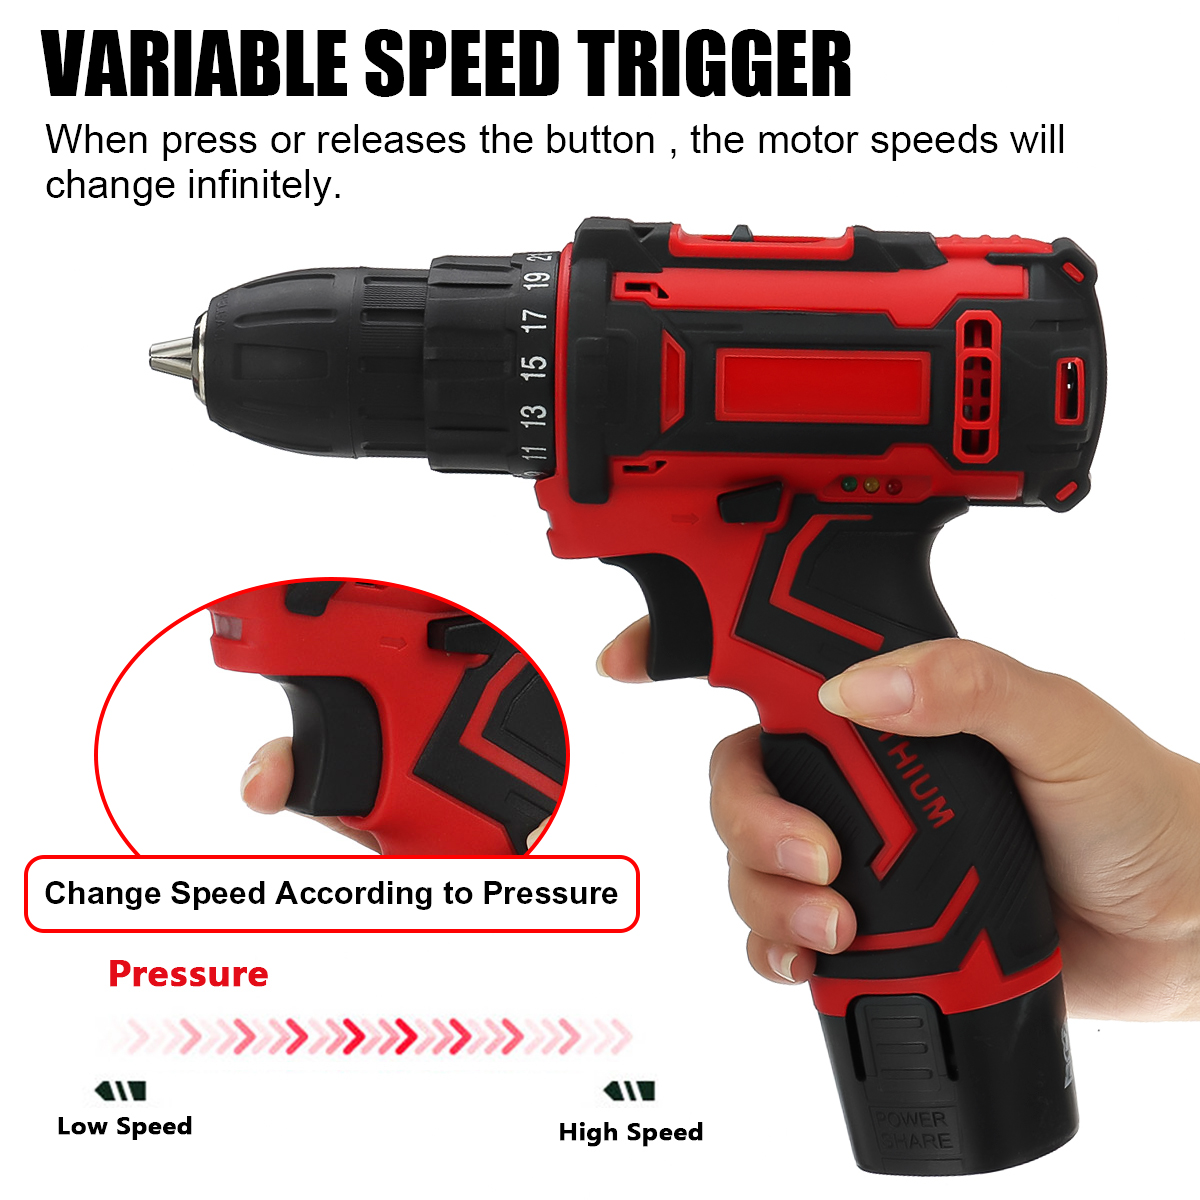 12V-300W-2-Speed-Cordless-Drill-Driver-251-Torque-1350-RPM-10mm-Electric-Screwdriver-W-12-Battery-1867946-4